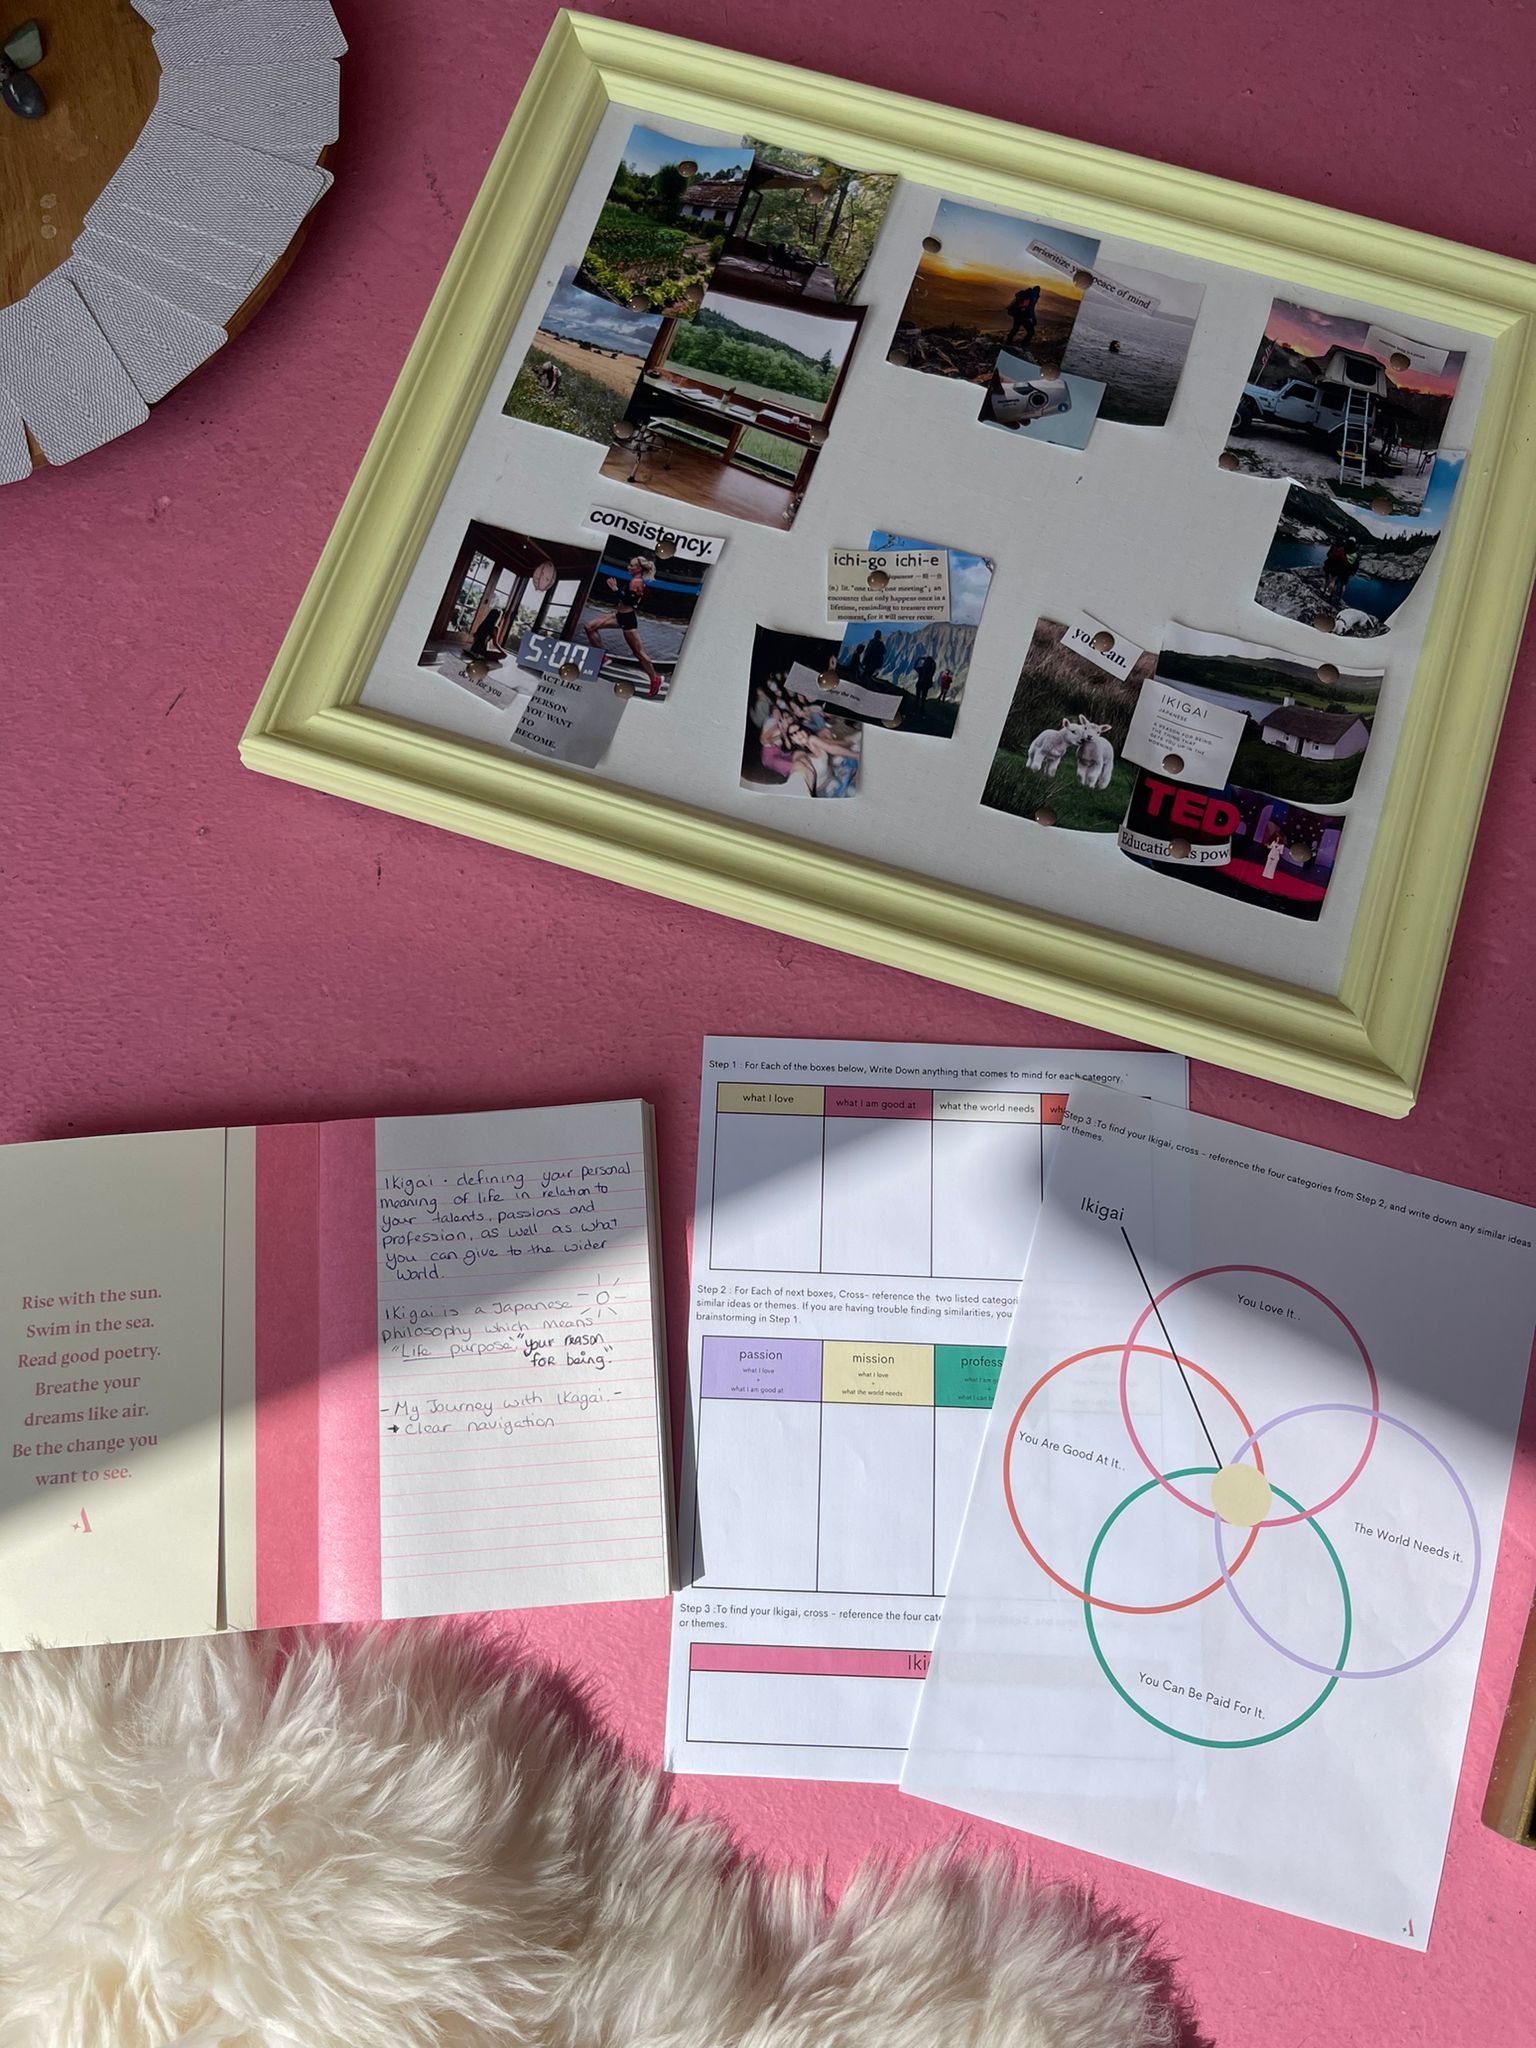 Reconnect | Cacao, Ikagai & Vision Board Workshop - Aug 24th